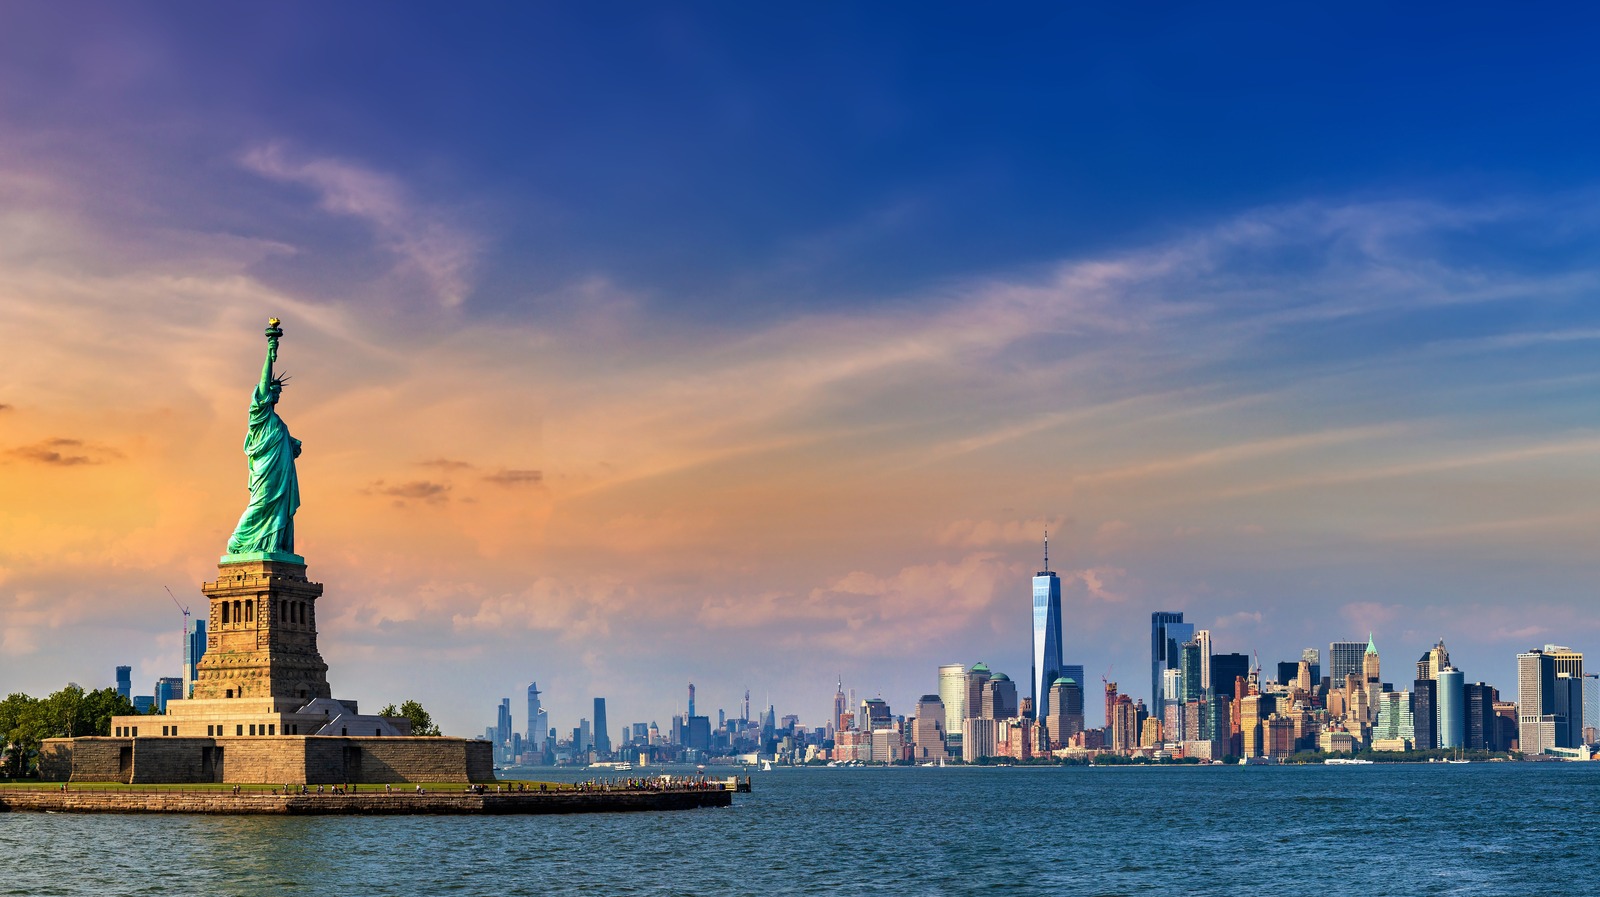 24 Best East Coast Cities For History Buffs To Add To Their Bucket Lists – Explore